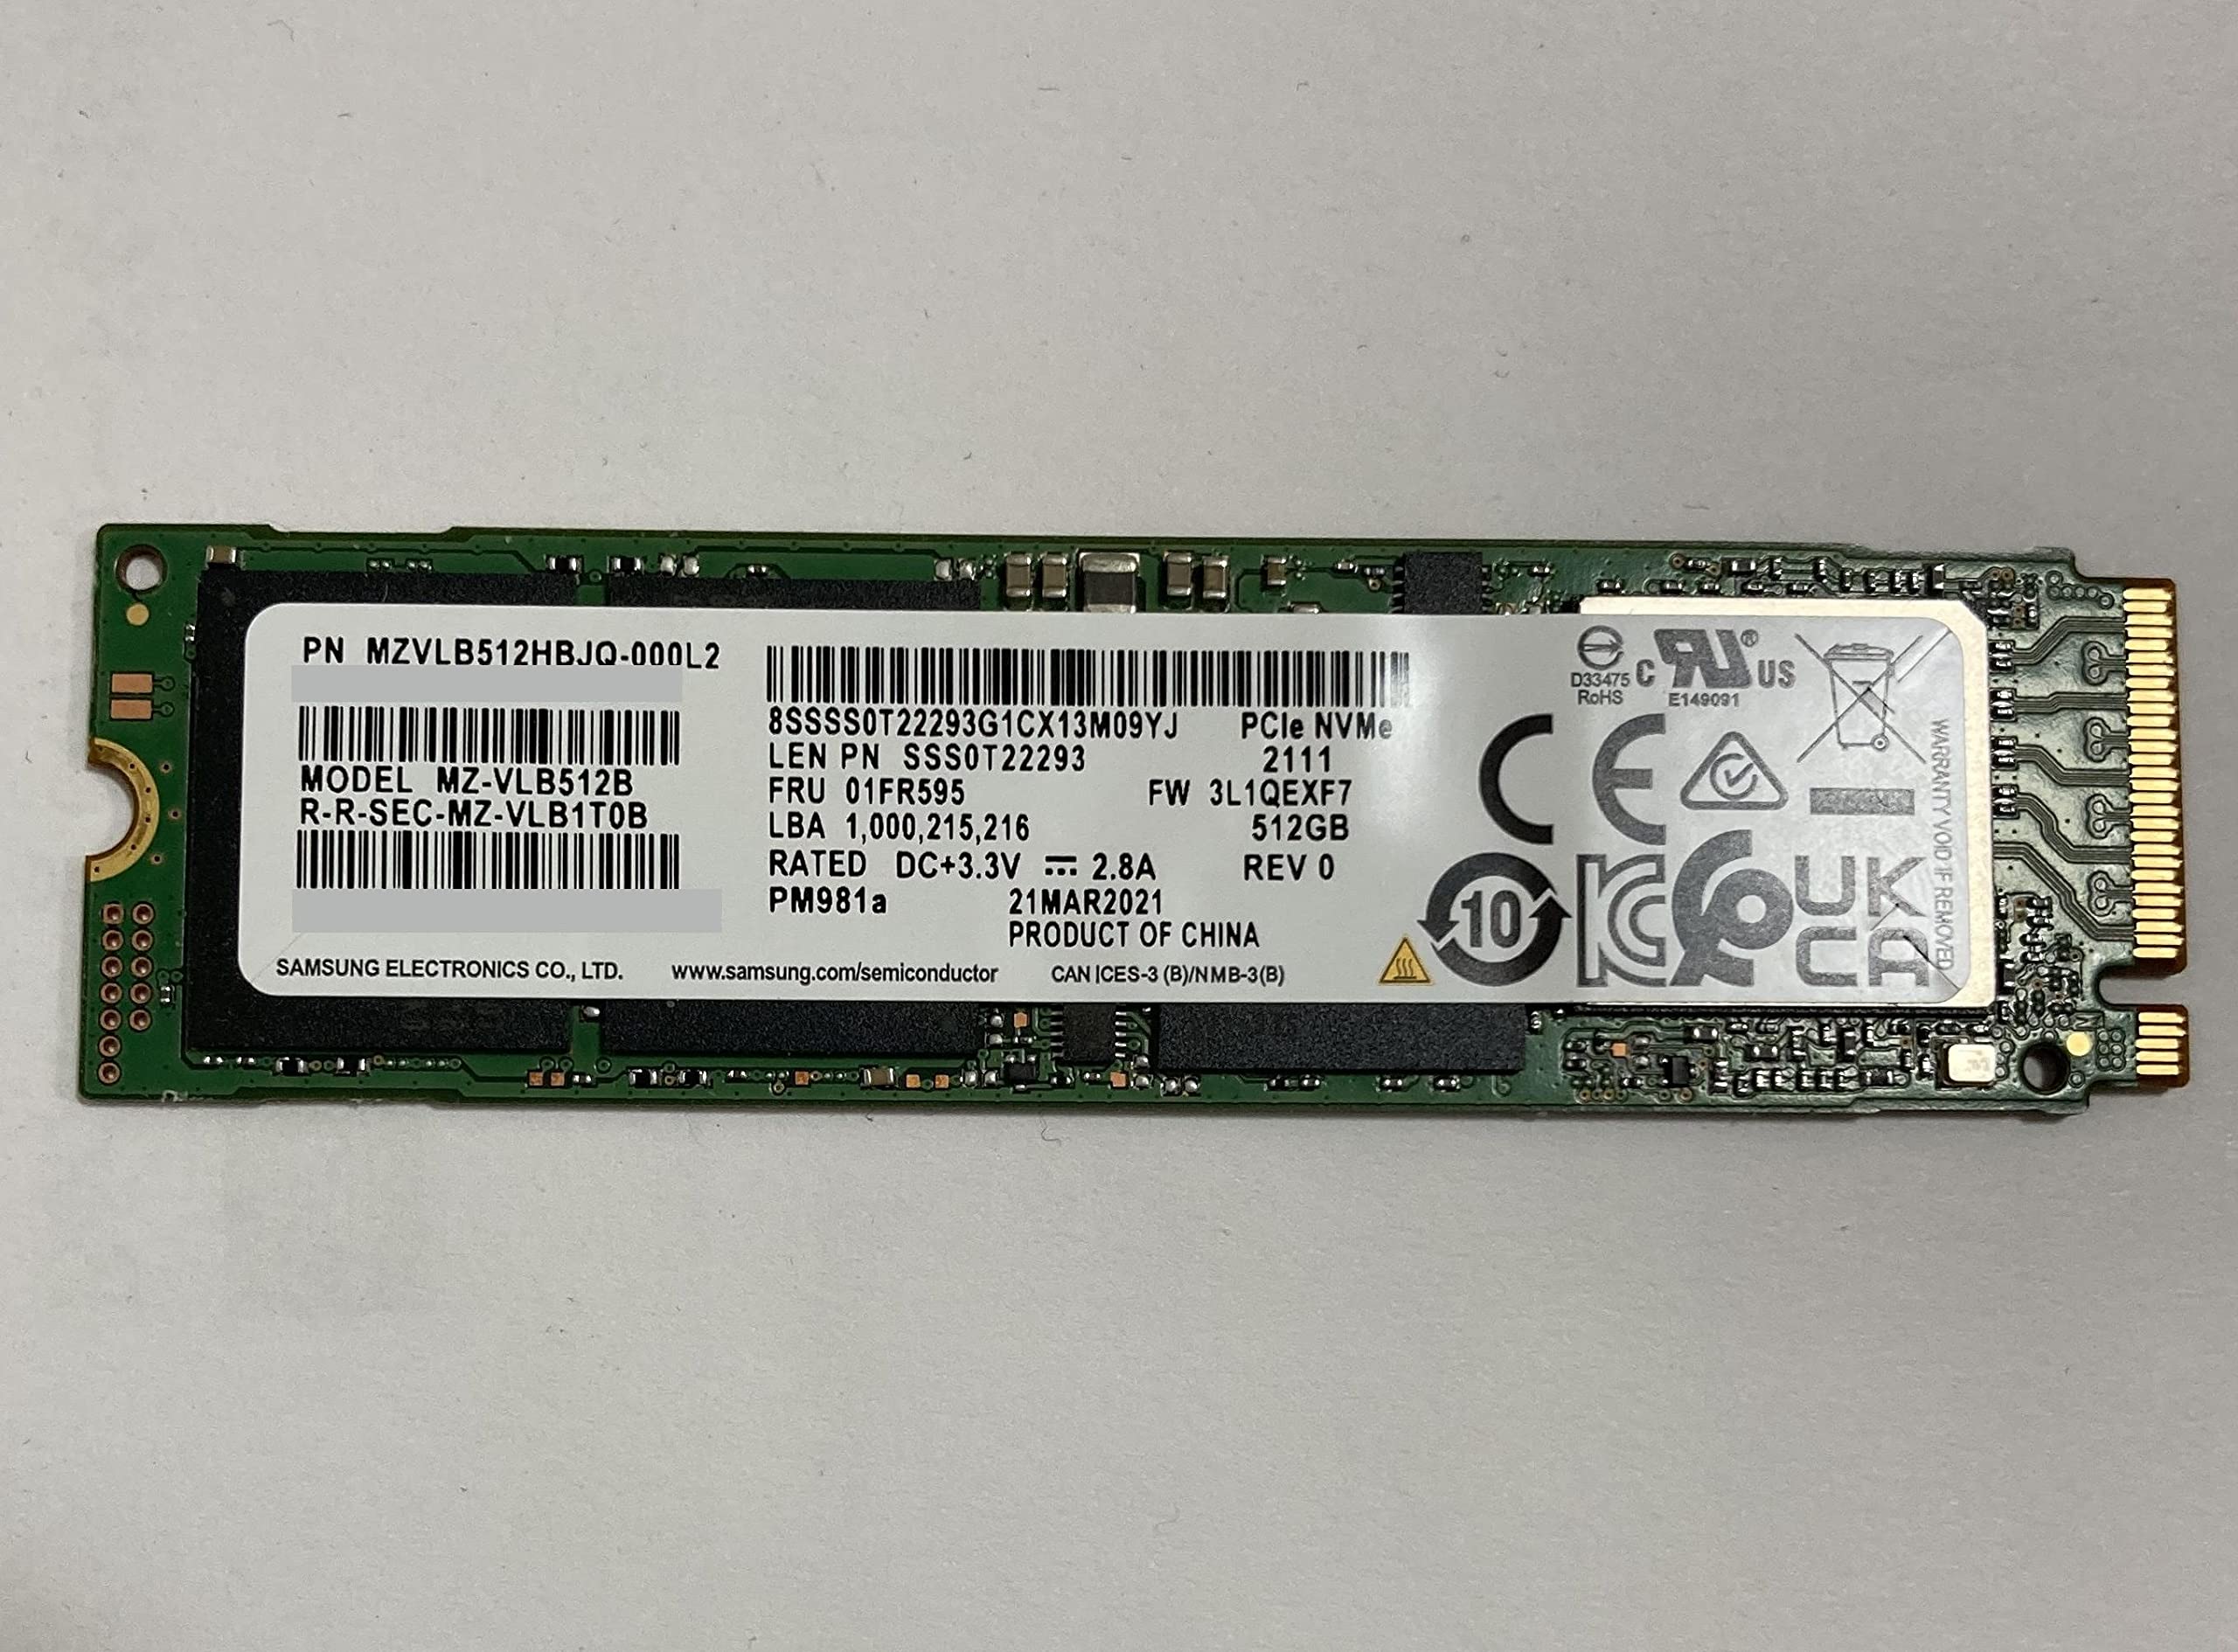 MZVLB512HBJQ-000D7 Samsung 512GB PM981a SED Encryption M2 M.2 2280 PCIe SSD (New with Warranty), MZ-VLB512C 0WD87X WD87X, PM981 Phoenix Controller, Compatible with Dell HP Acer Asus Lenovo